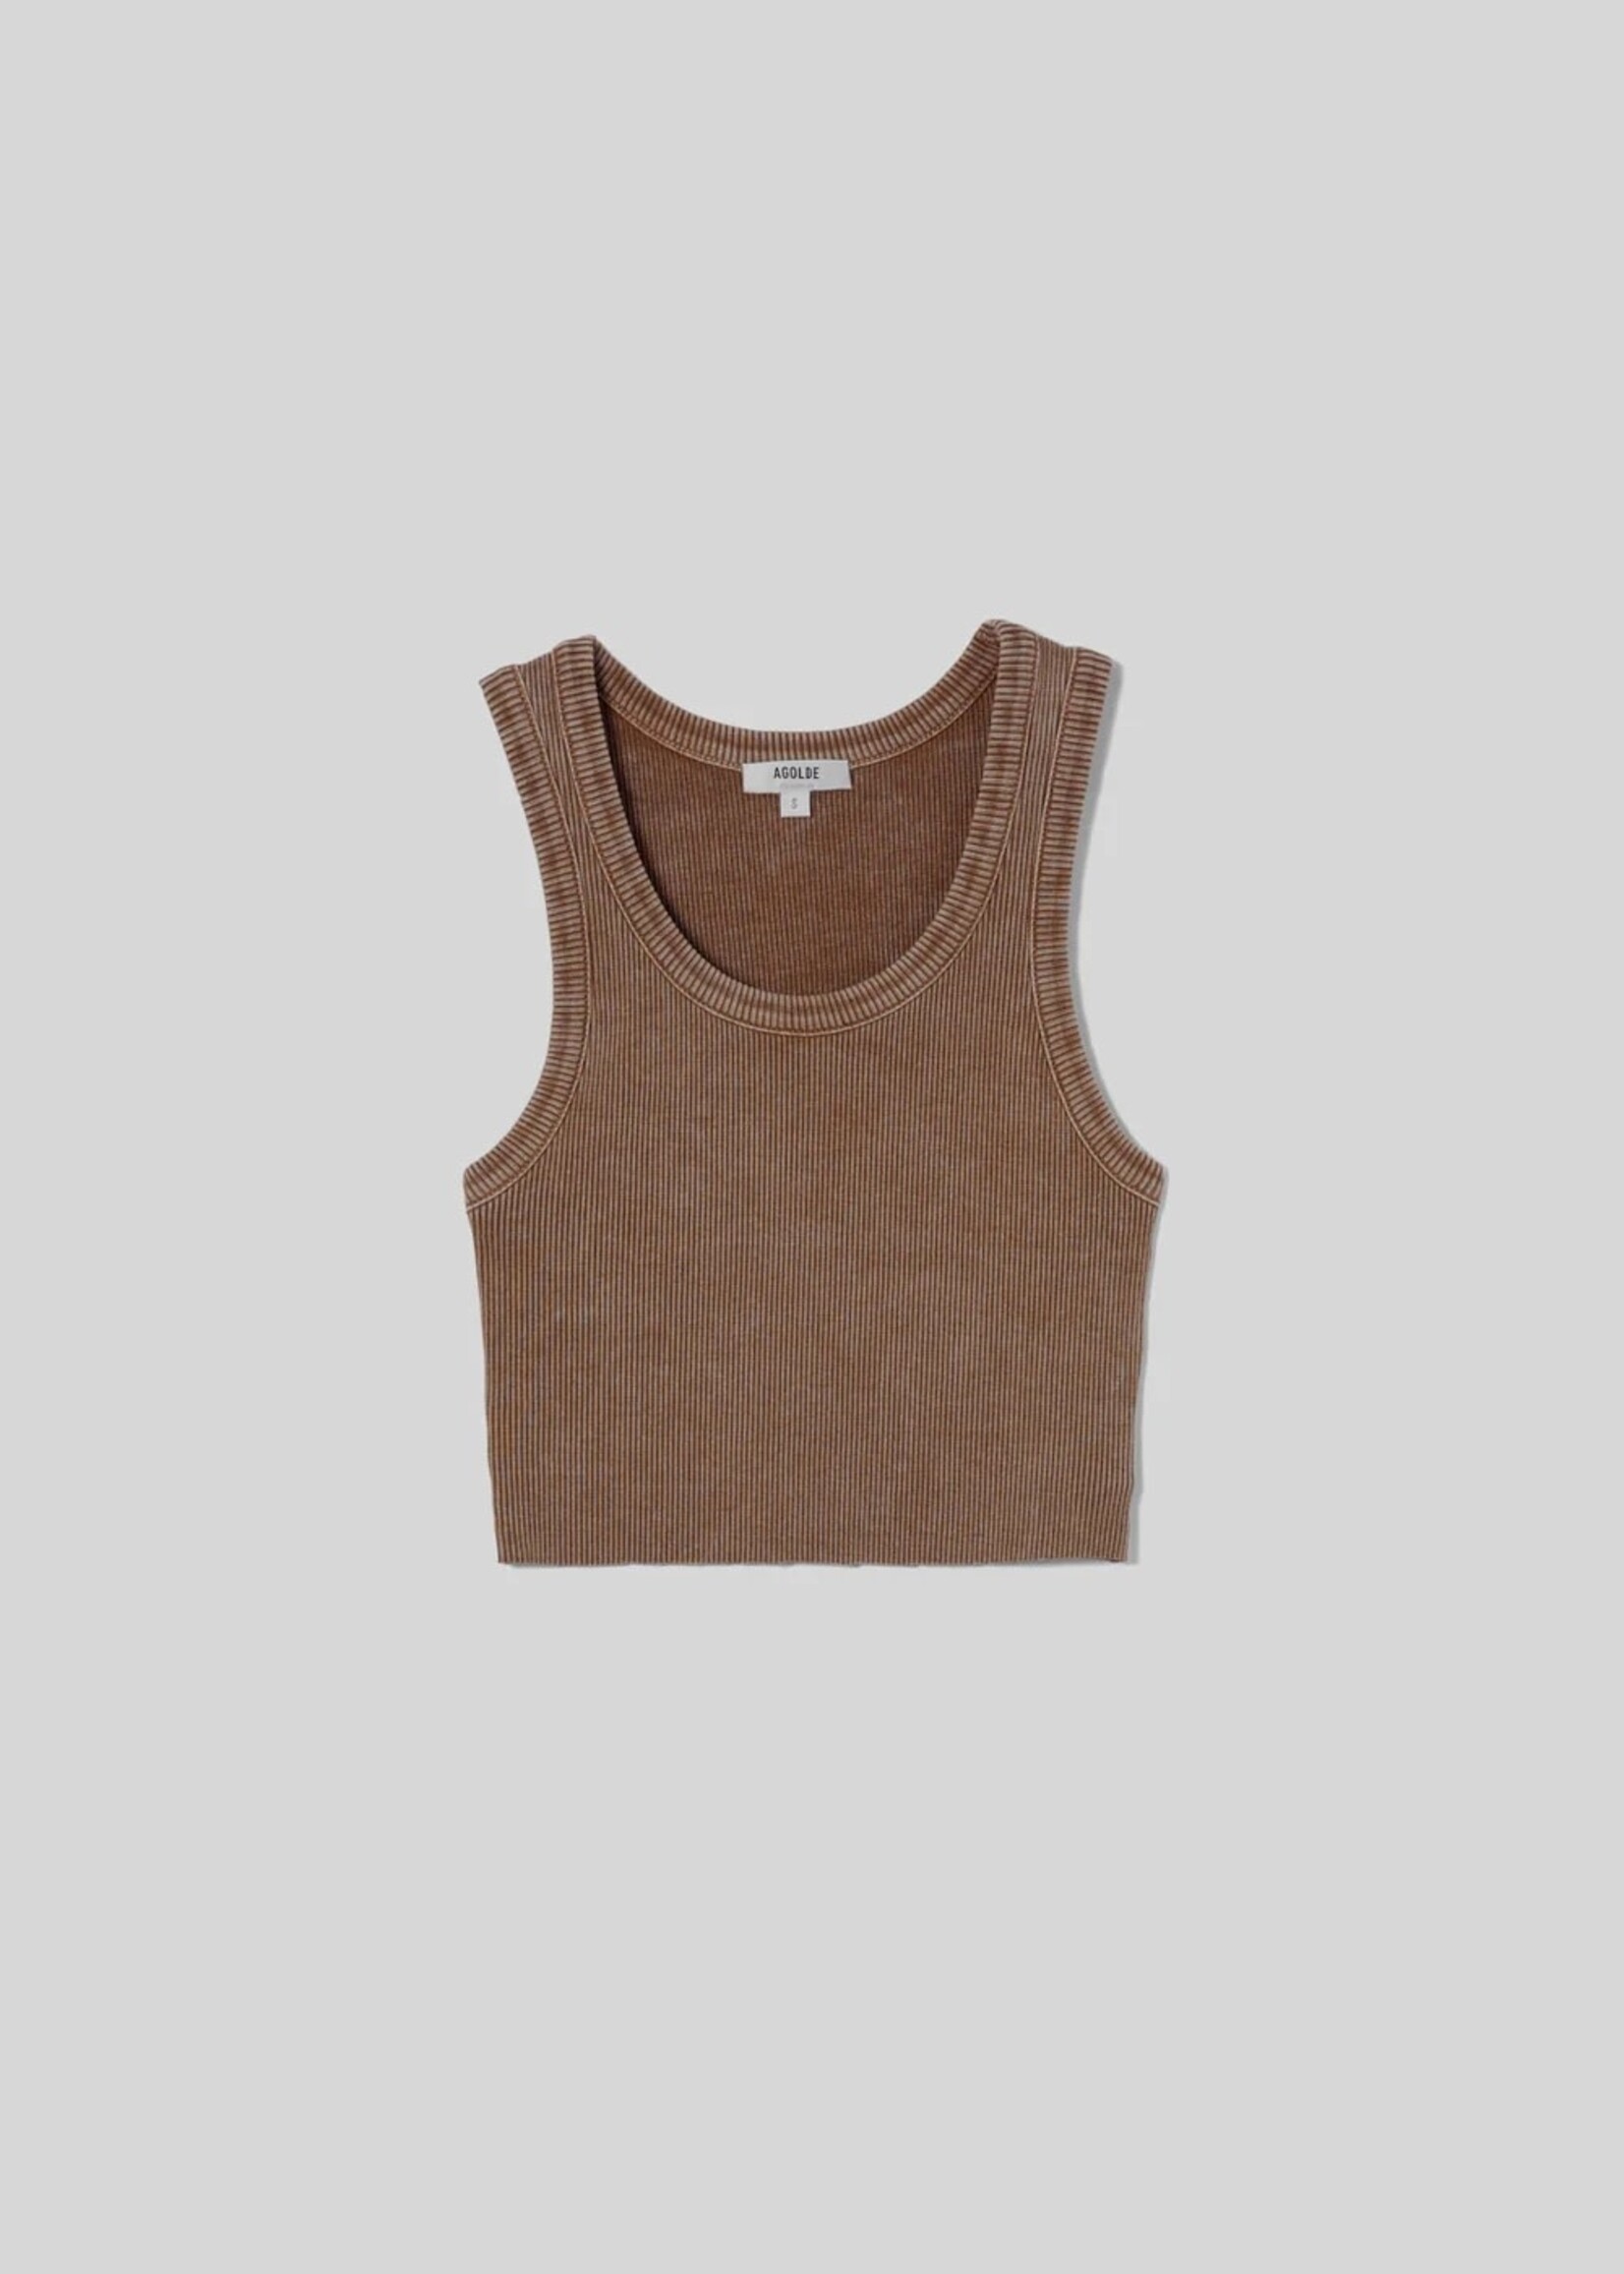 AGOLDE Cropped Poppy Tank Top in Bamboo